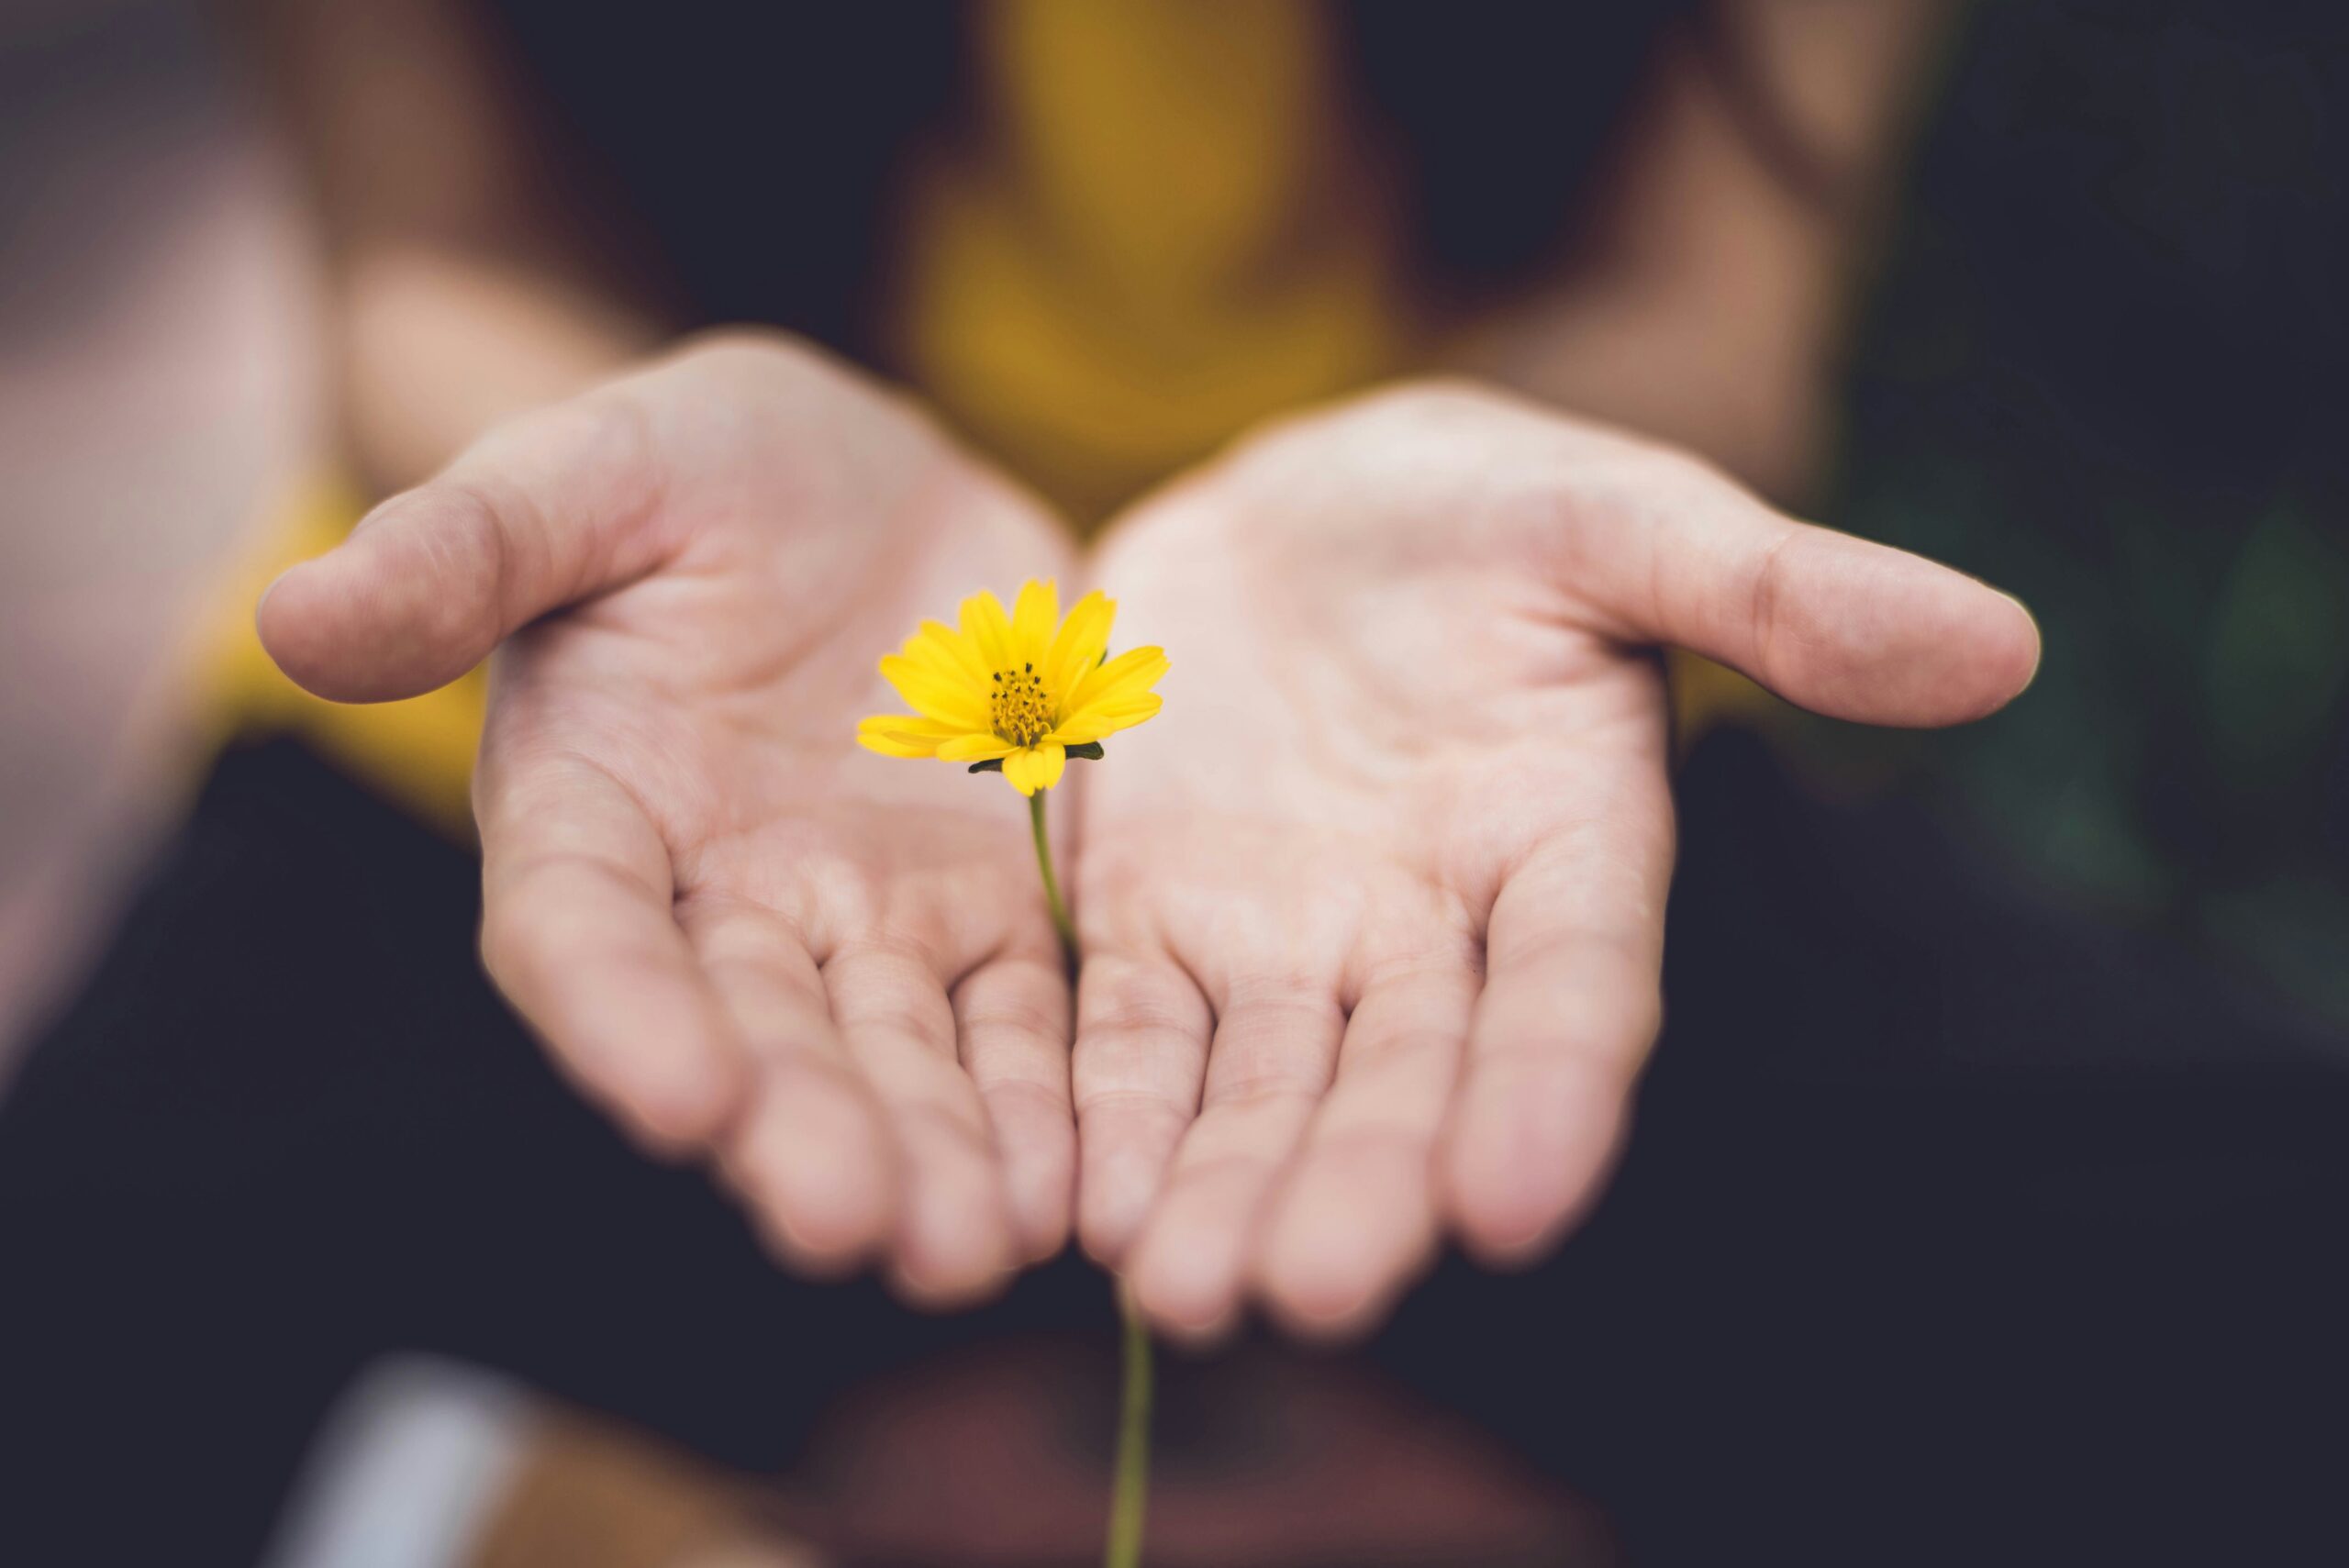 Hands gently holding a small yellow flower, symbolizing the nurturing support and growth facilitated by GiftAider for charitable donations.